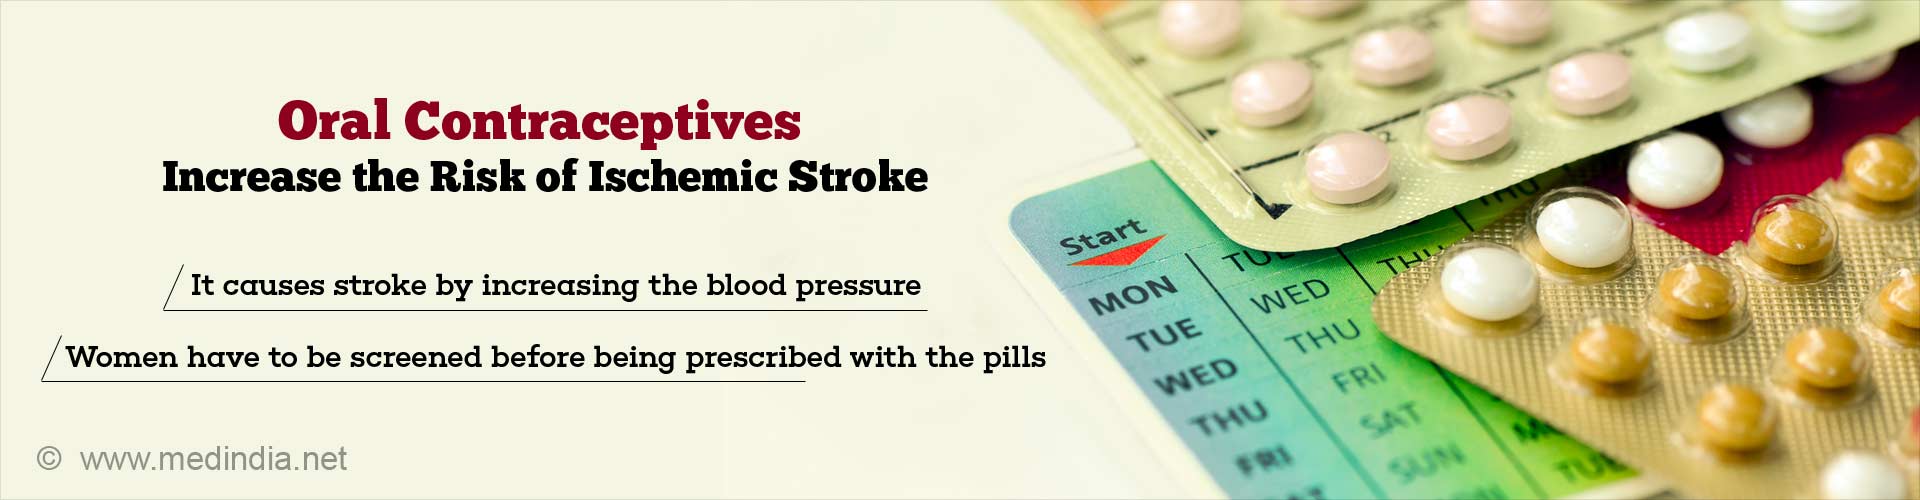 oral contraceptives increase the risk of ischemic stroke
- it causes stroke by increasing the blood pressure
- women have to be screened before being prescribed with the pills